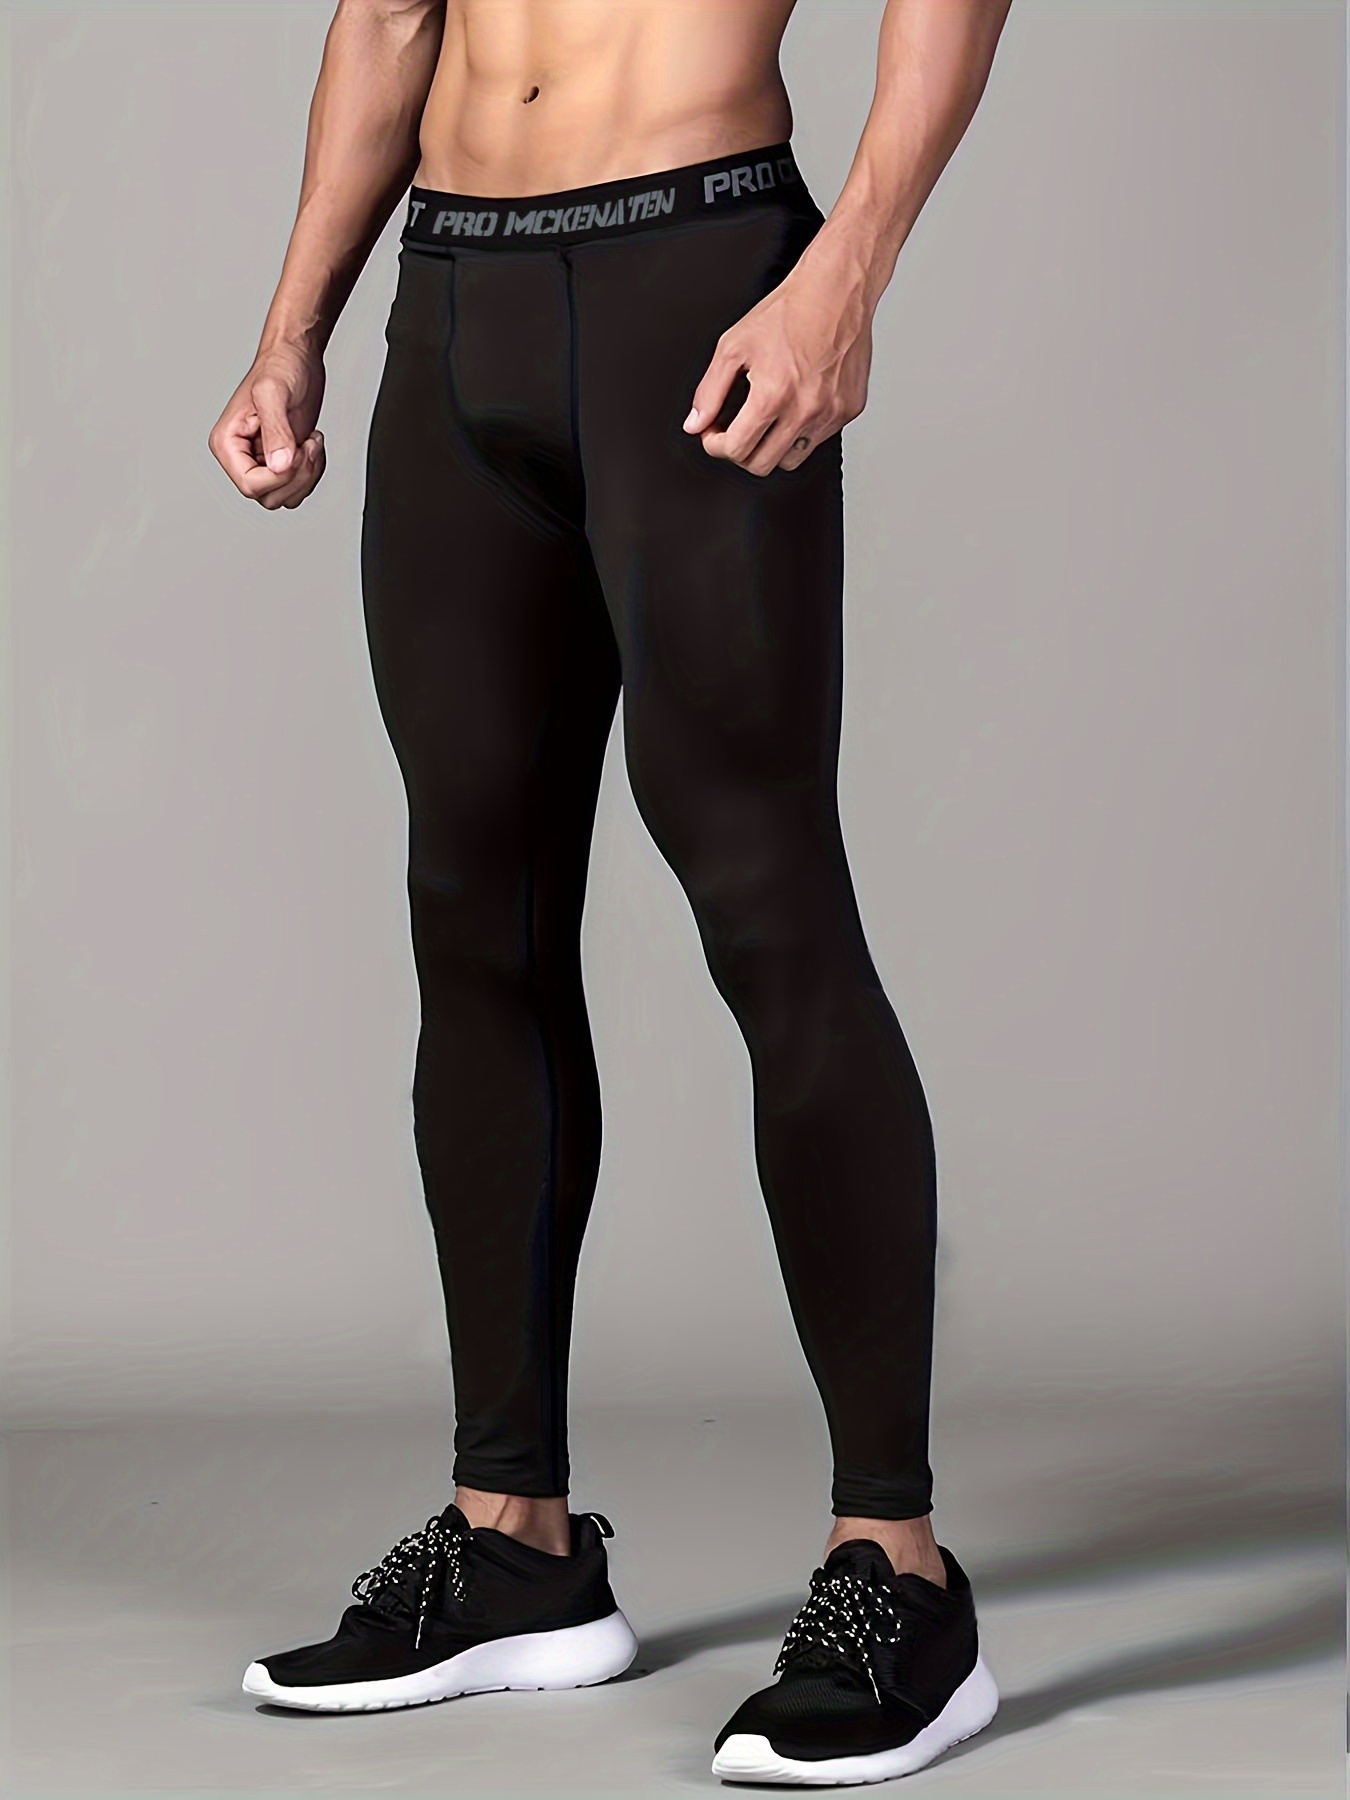 Men's Basketball Compression Tights Athletic Running Fitness